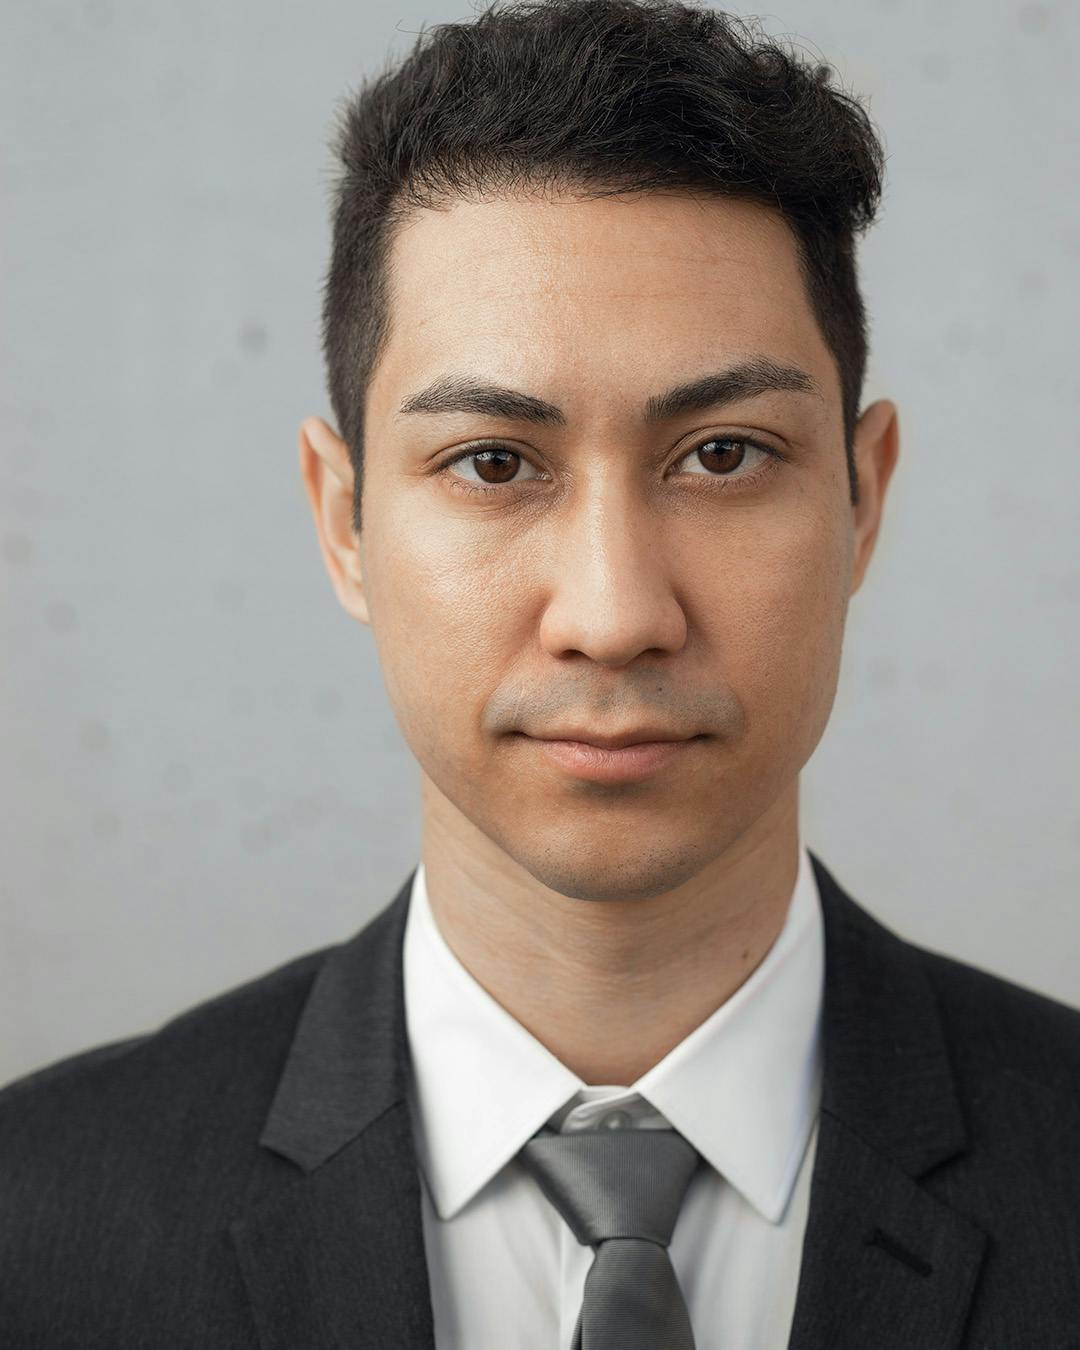 Man standing in a suit and tie.